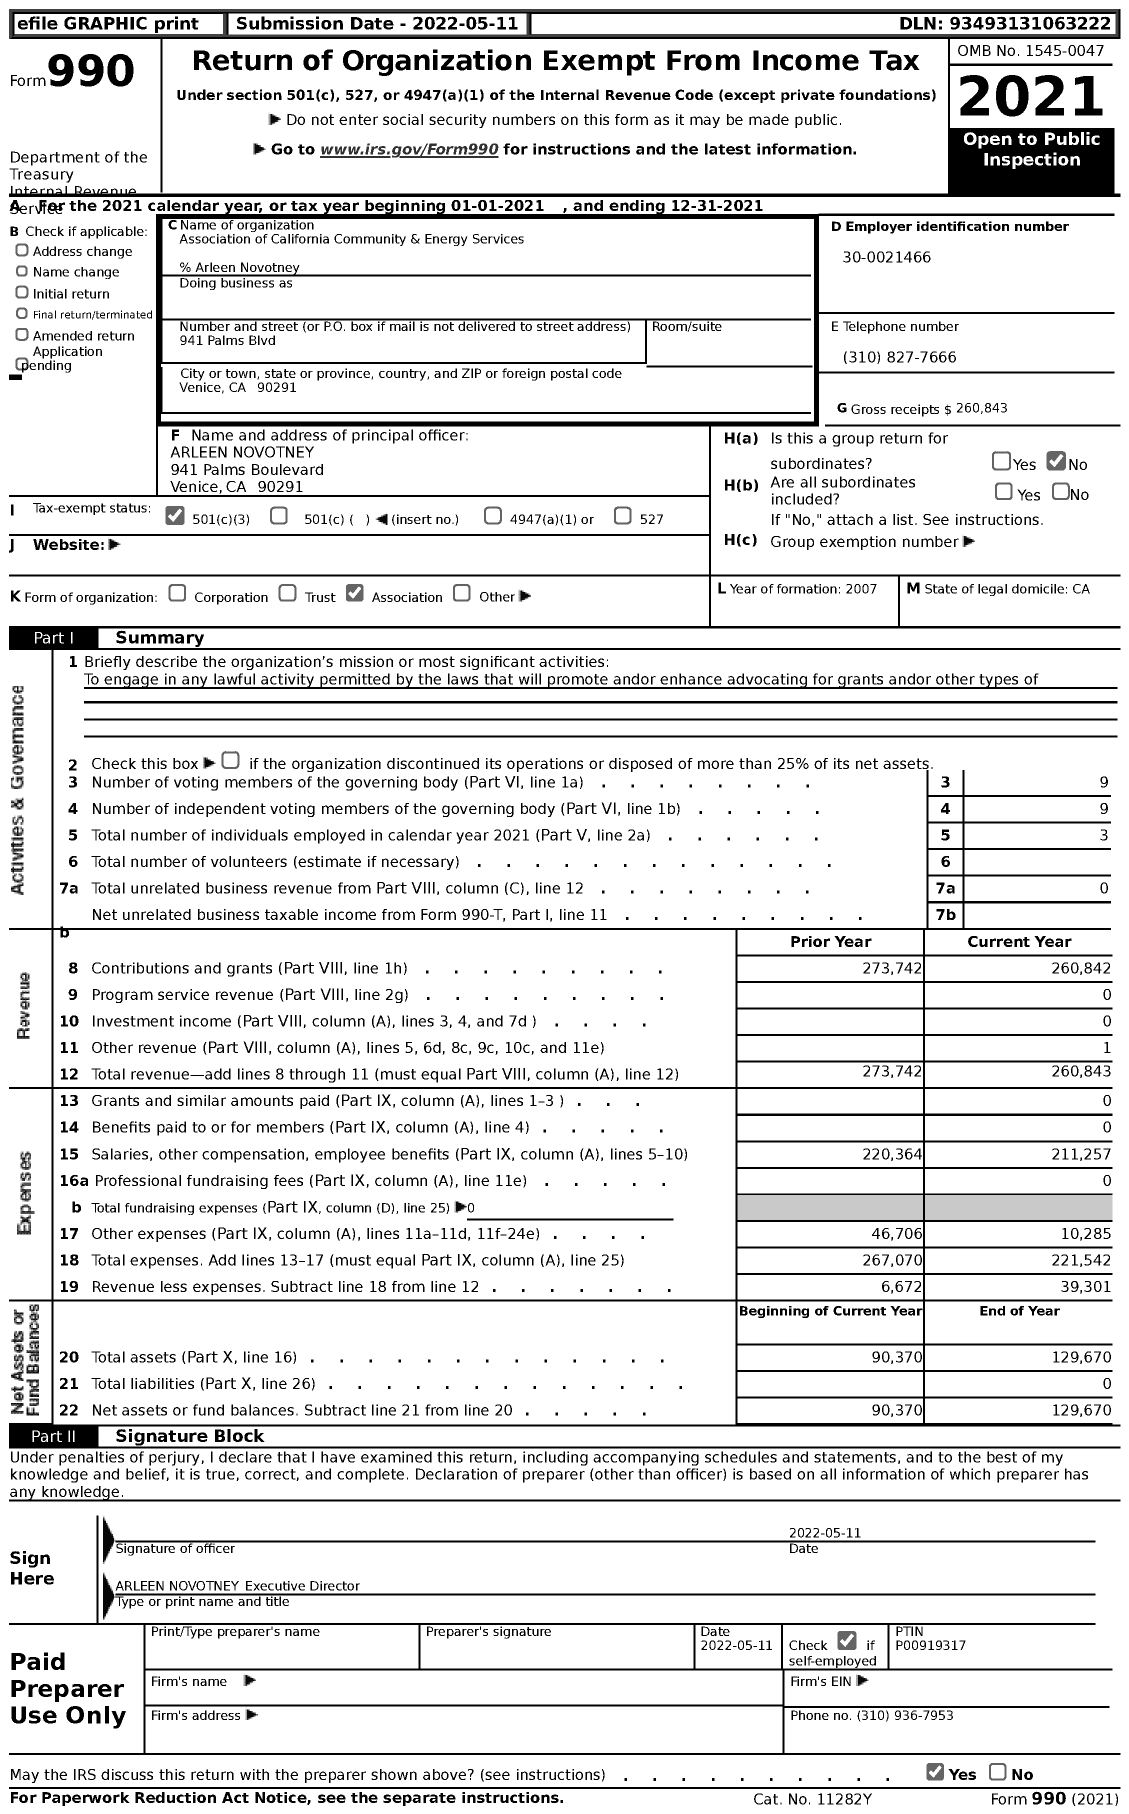 Image of first page of 2021 Form 990 for Association of California Community and Energy Services (ACCES)